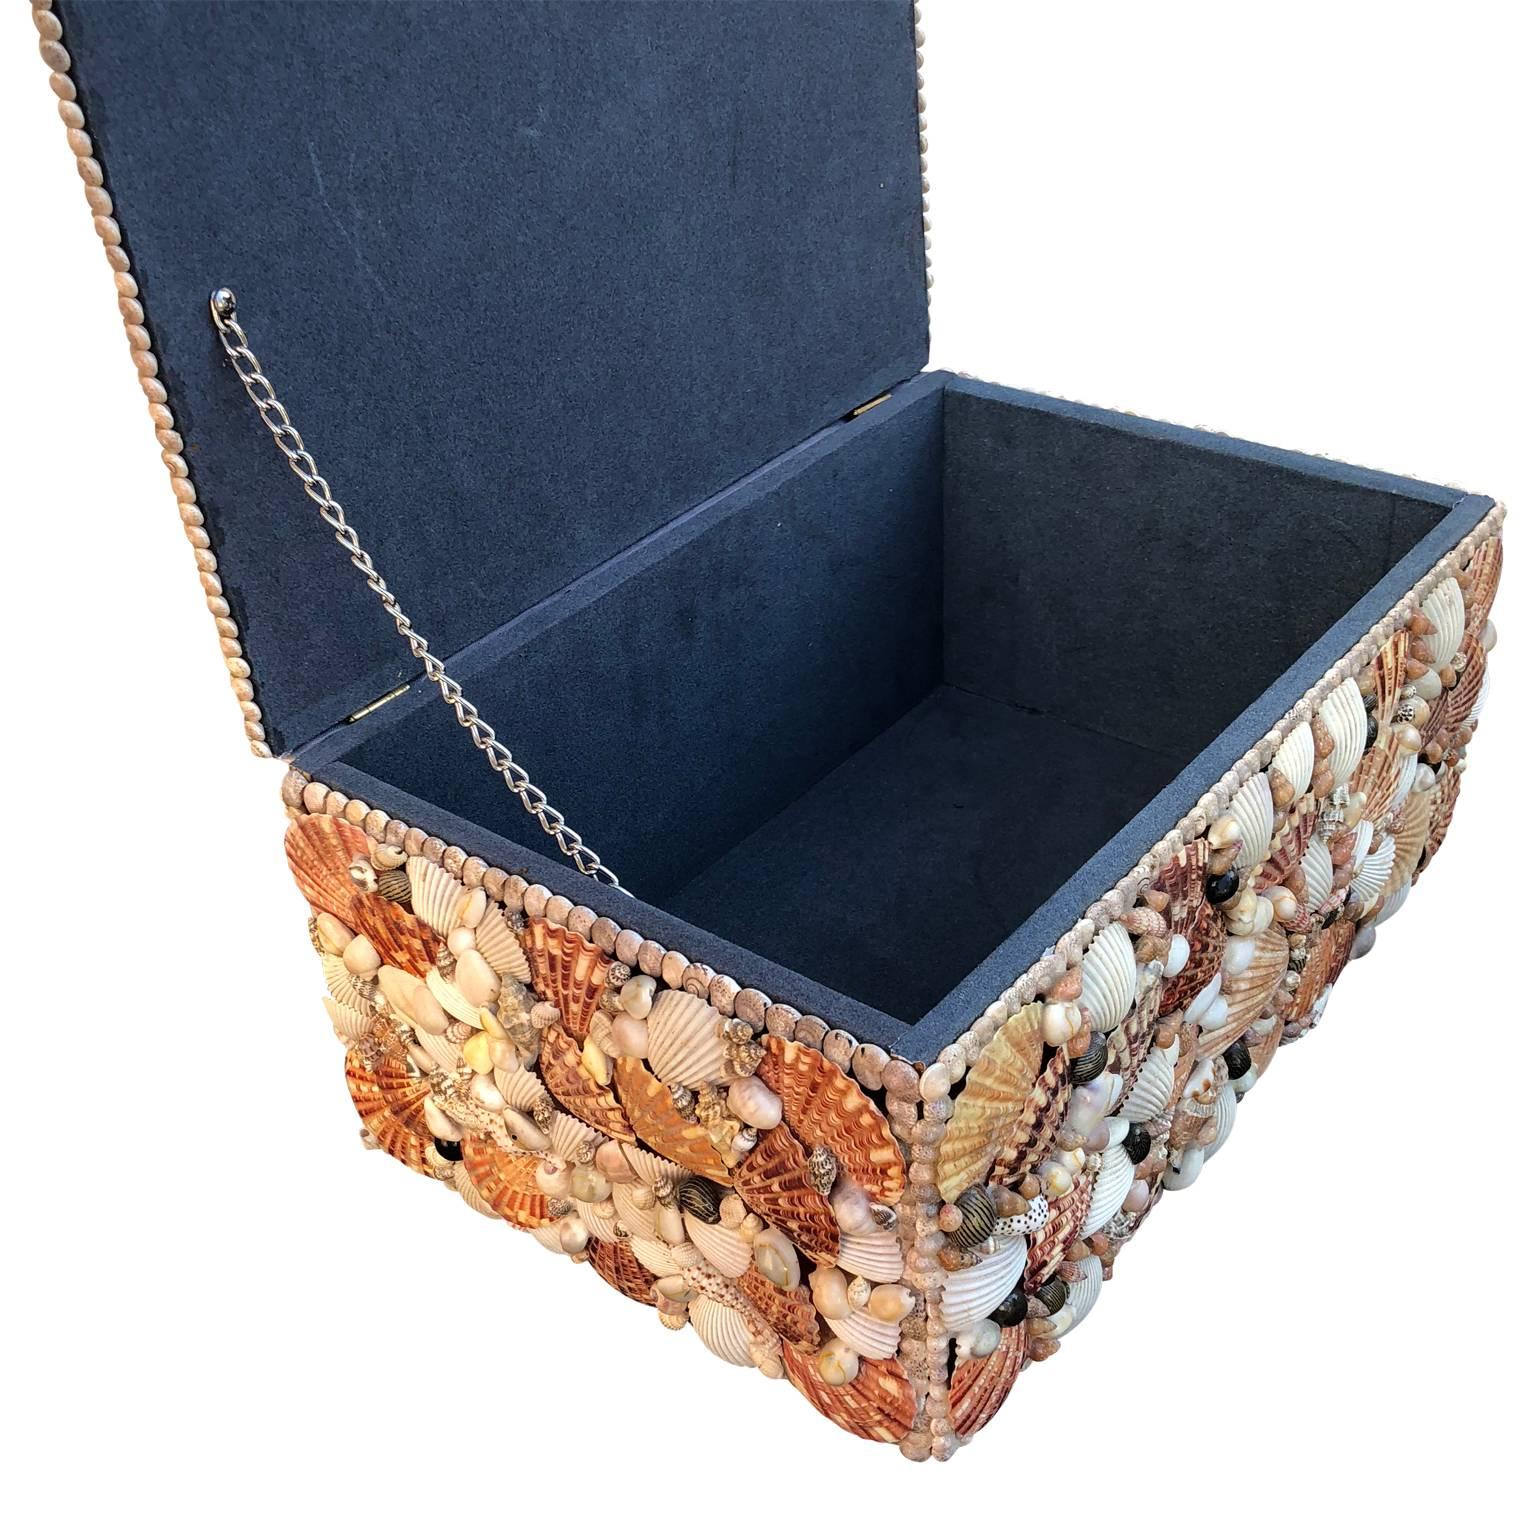 Philippine Vintage Jewelry Box Covered Pacific Seashell